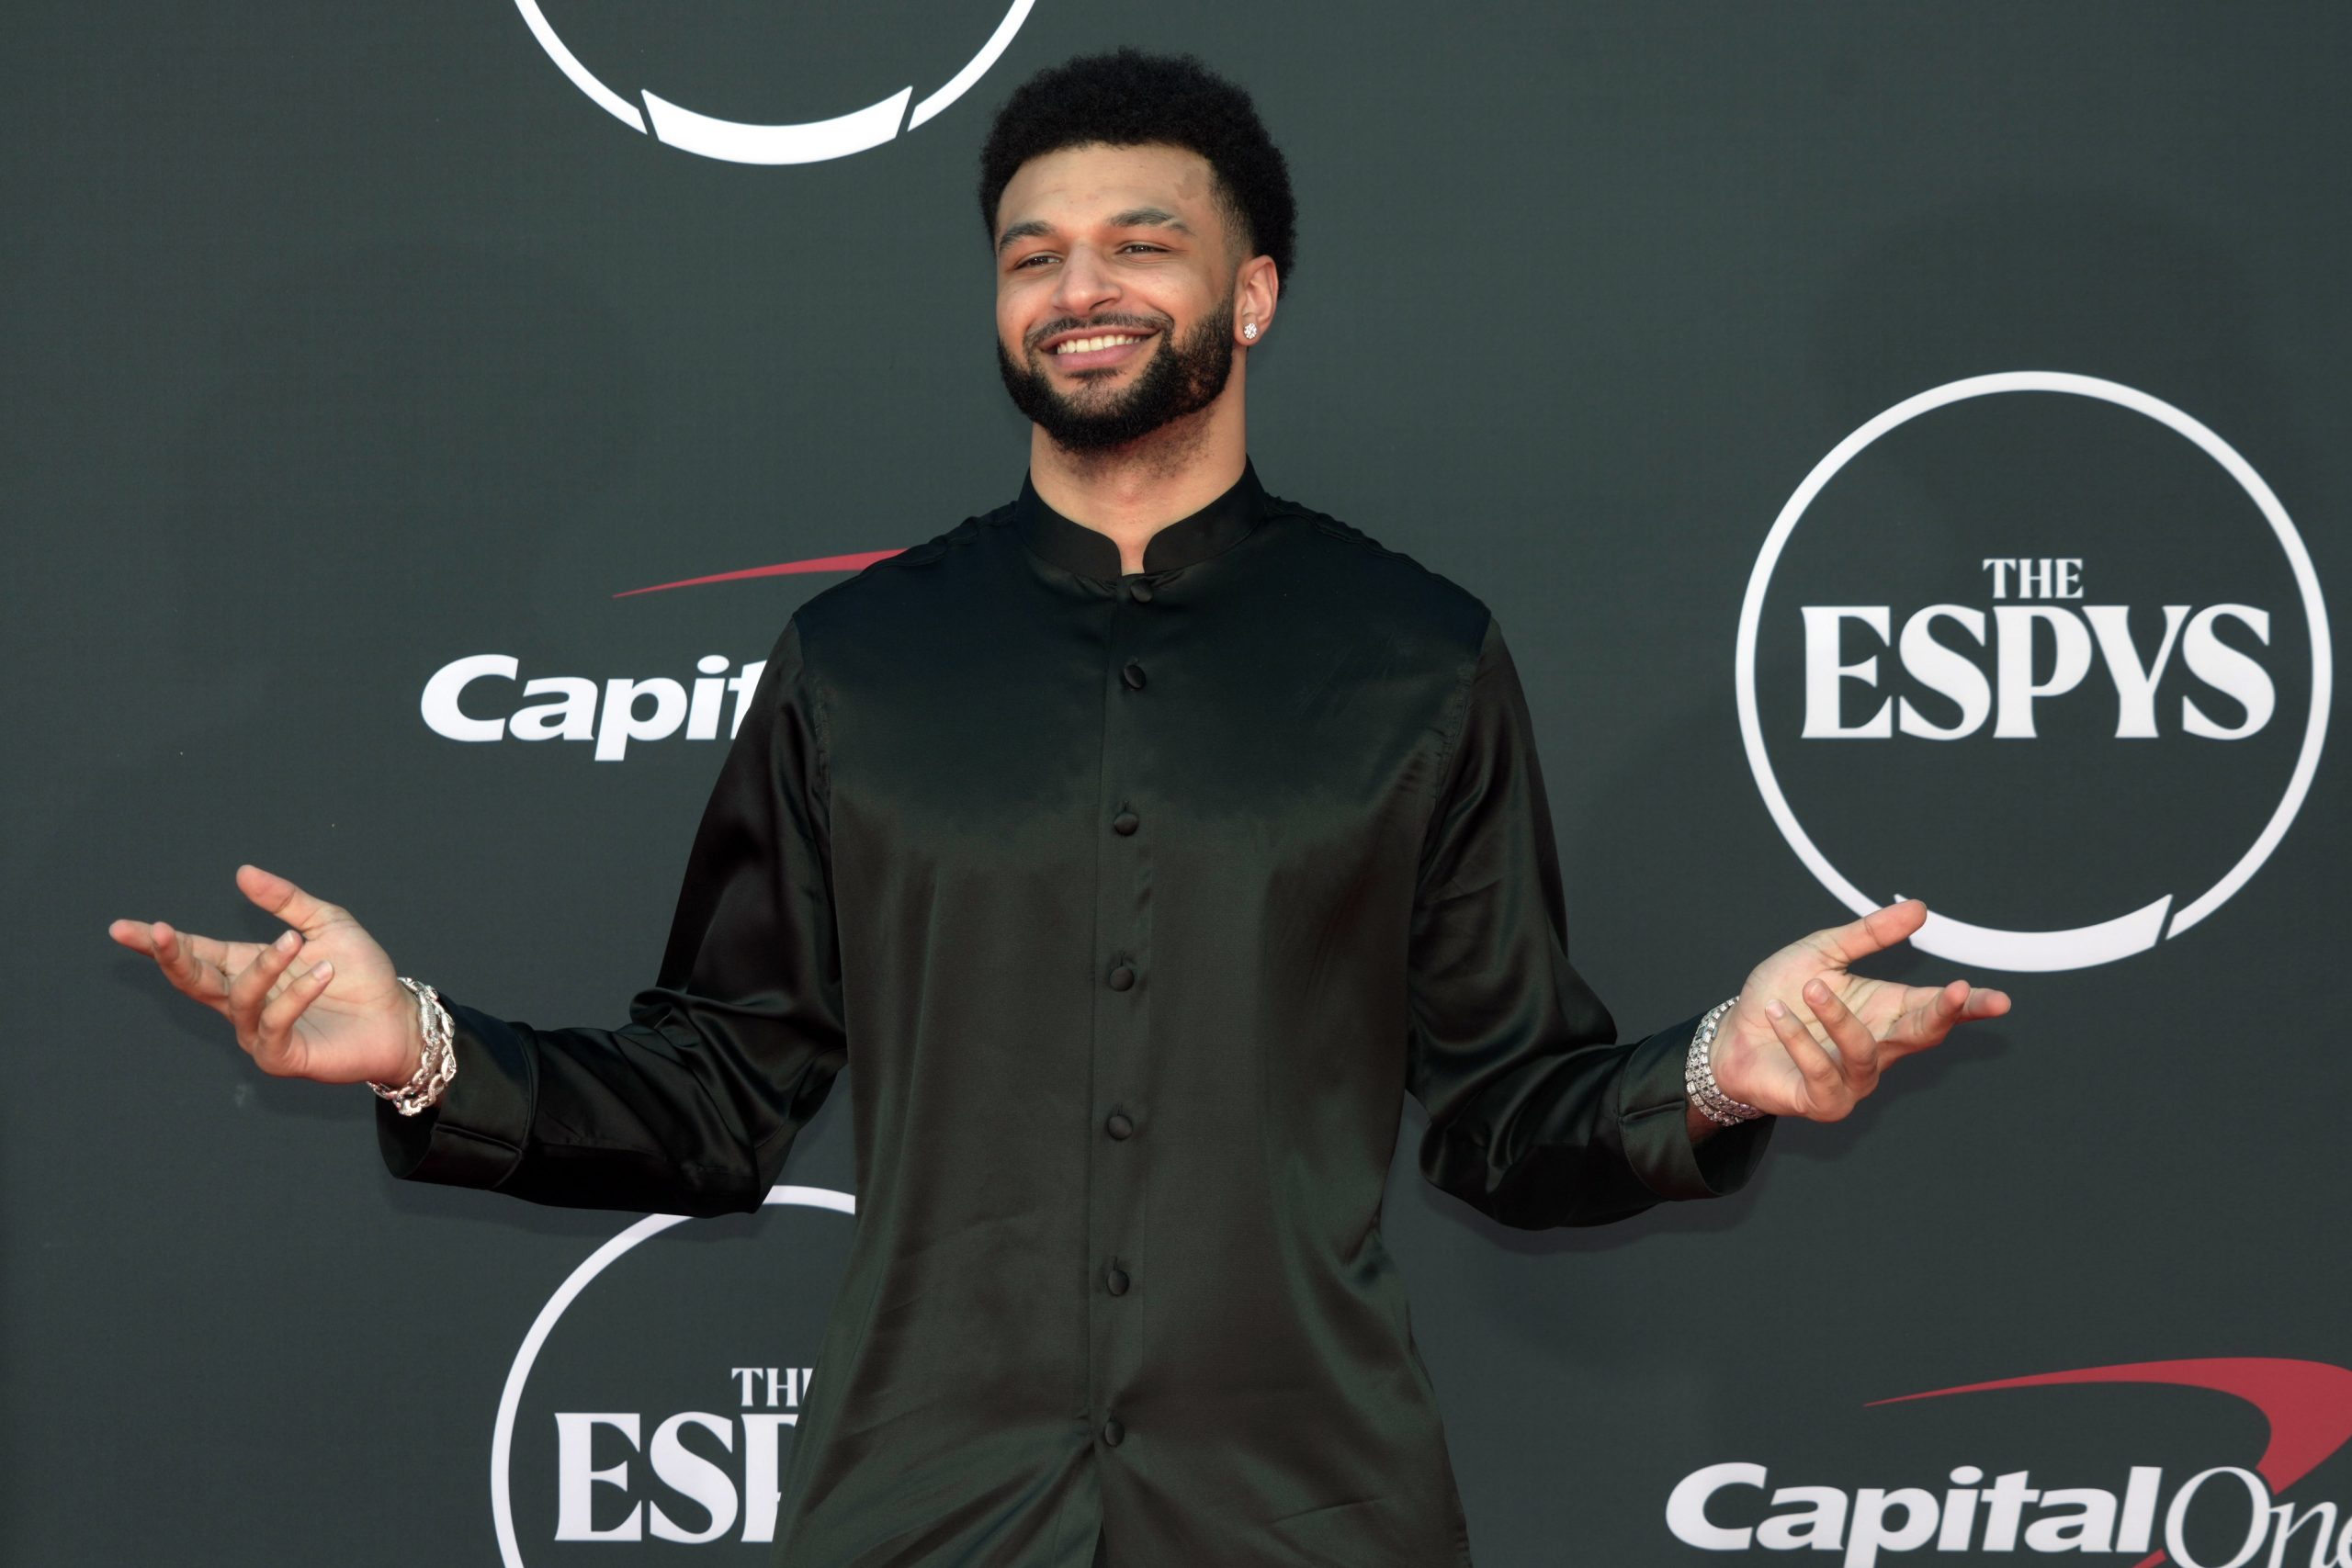 Jul 12, 2023; Los Angeles, CA, USA; Denver Nuggets point guard Jamal Murray arrives on the red carpet before the 2023 ESPYS at the Dolby Theatre. Mandatory Credit: Kirby Lee-USA TODAY Sports. Murray is a player to consider in this fantasy basketball match-up between Canada and the US.